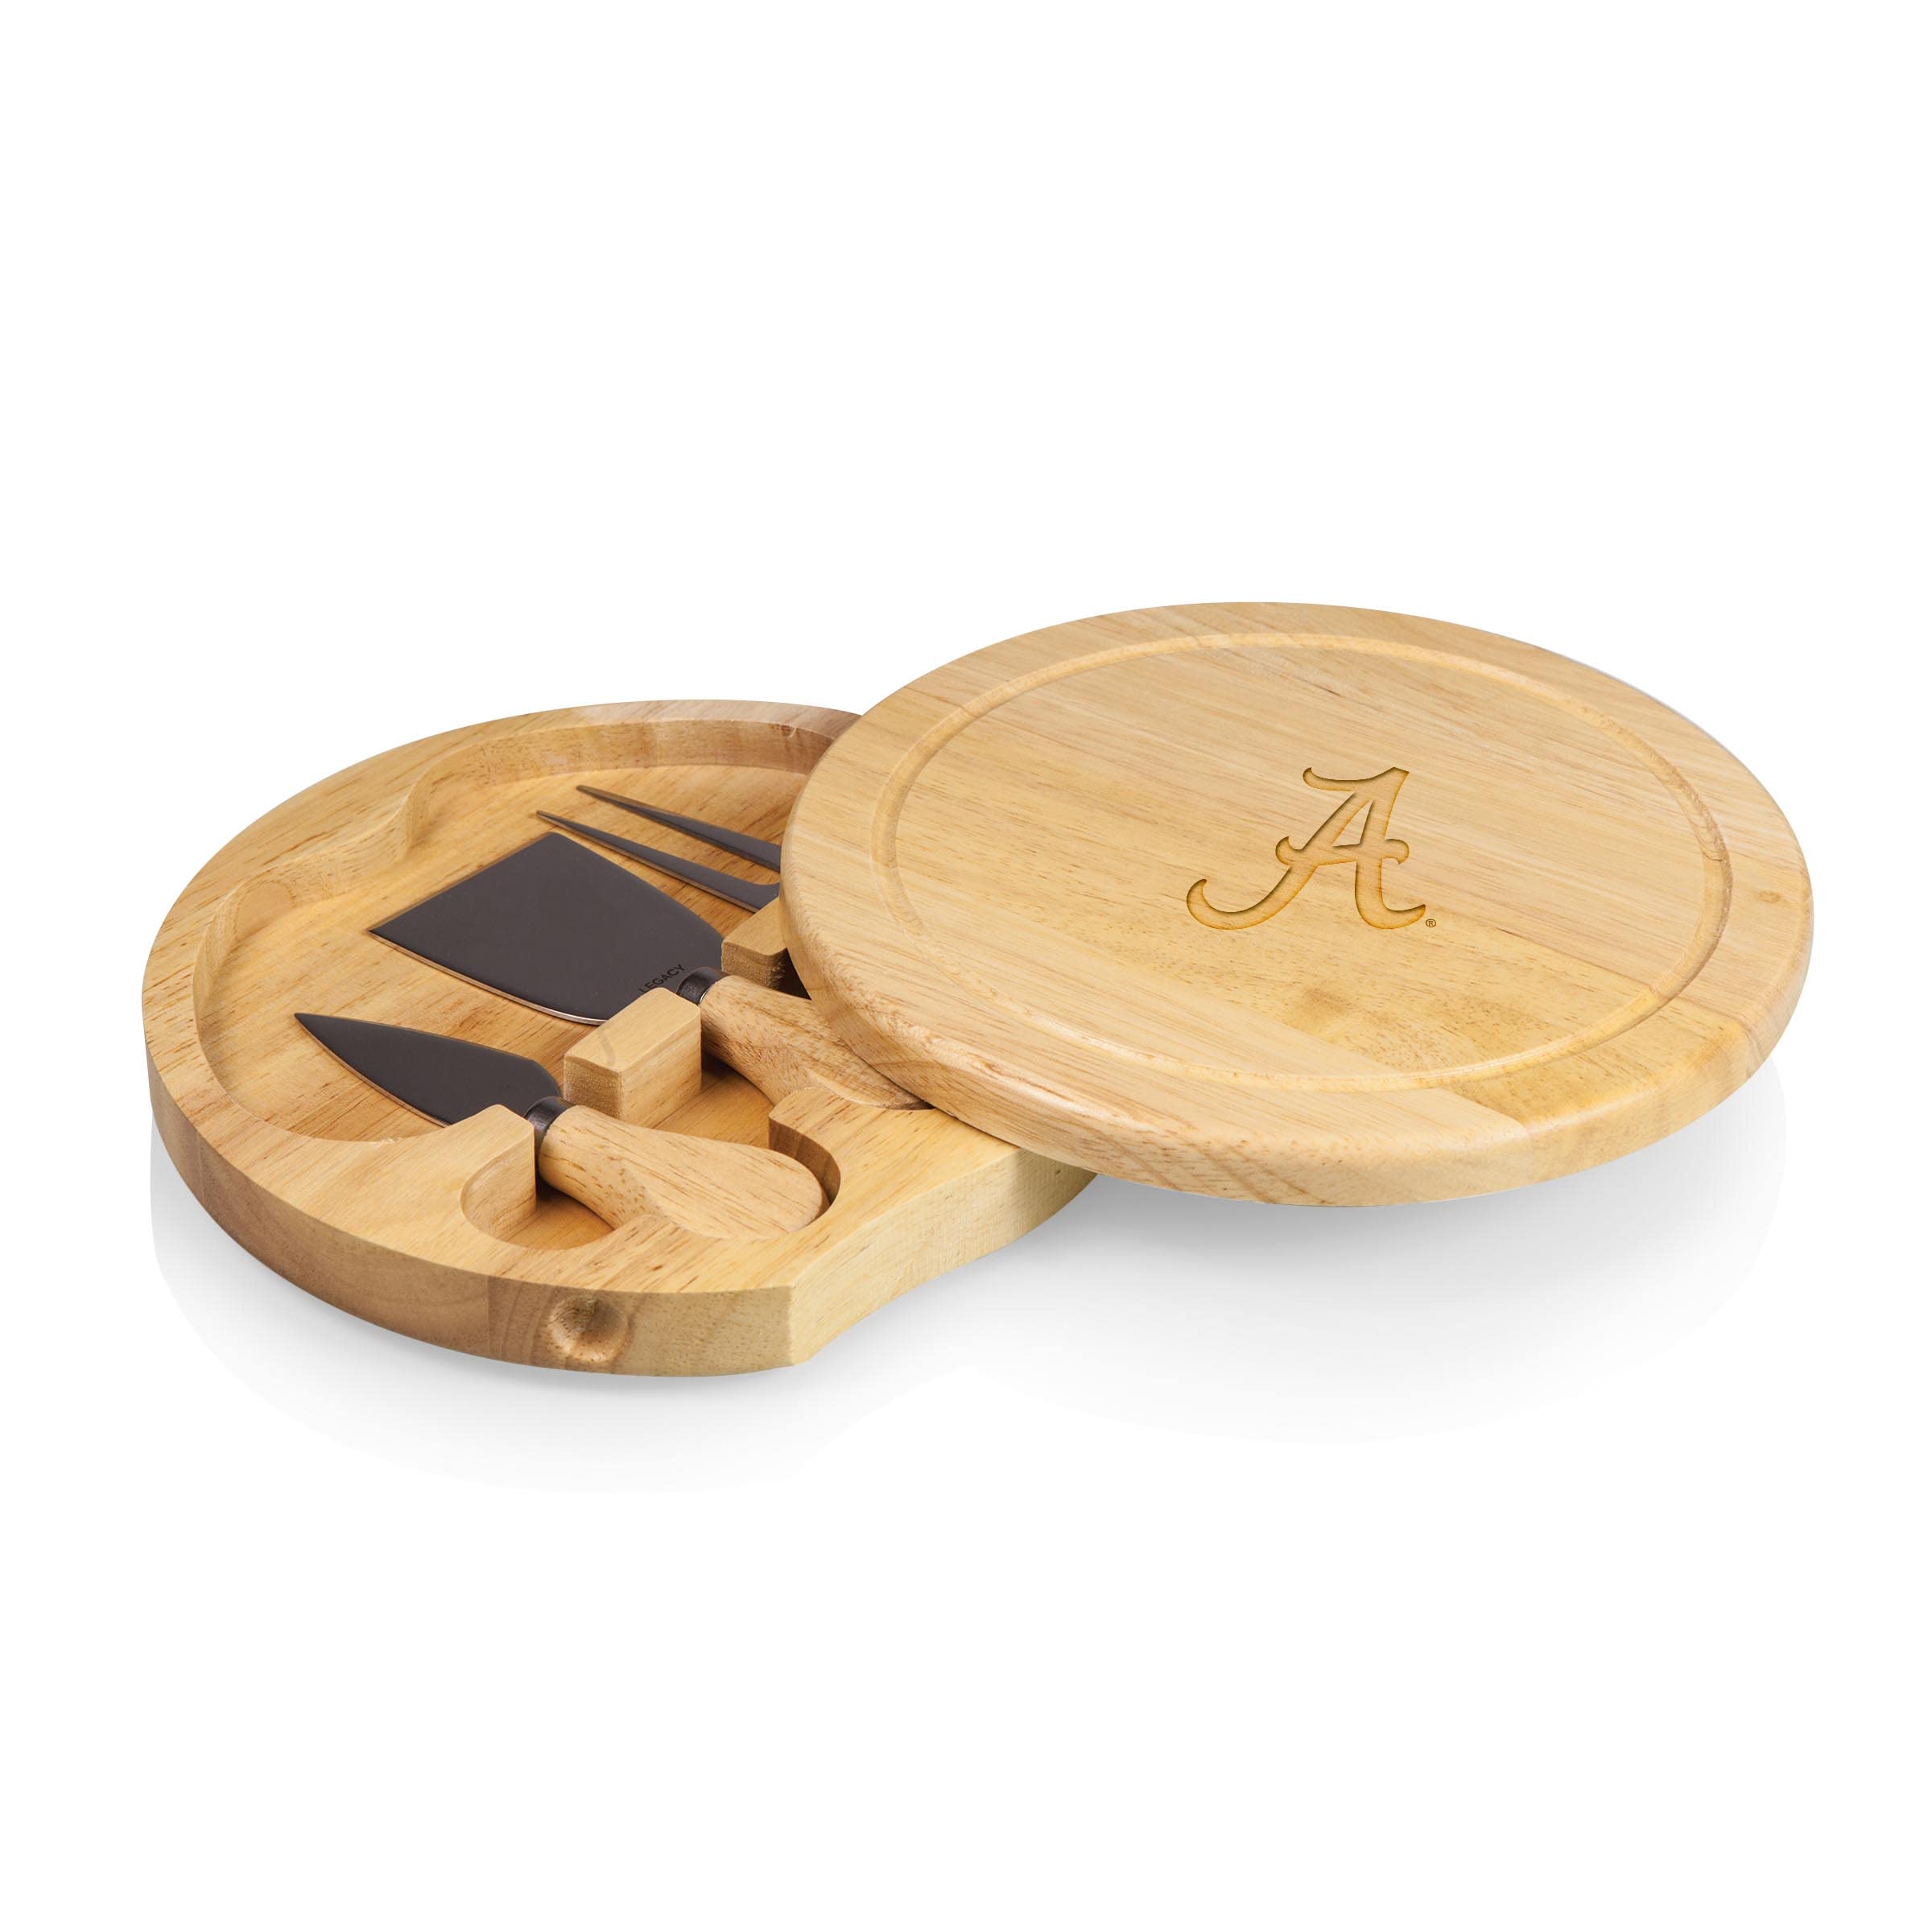 Toscana - A Picnic Time Brand Brie Cutting Board & Tools Set Cheese Boards, One Size, Rubberwood